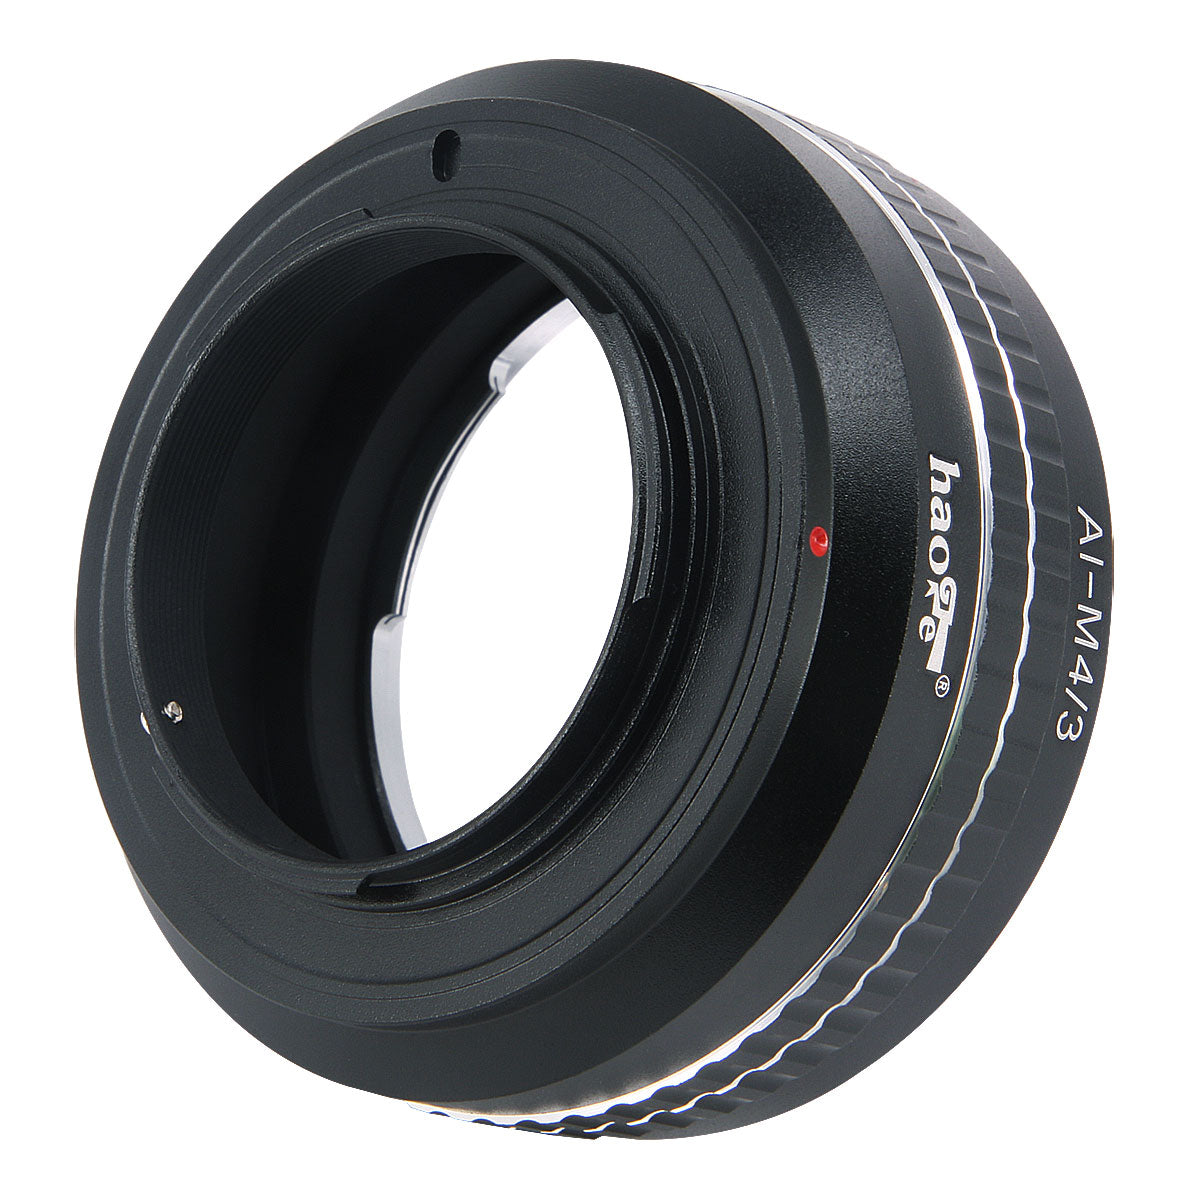 Haoge Manual Lens Mount Adapter for Nikon Nikkor F/AI/AIS/D Mount Lens to Olympus and Panasonic Micro Four Thirds MFT M4/3 M43 Mount Camera